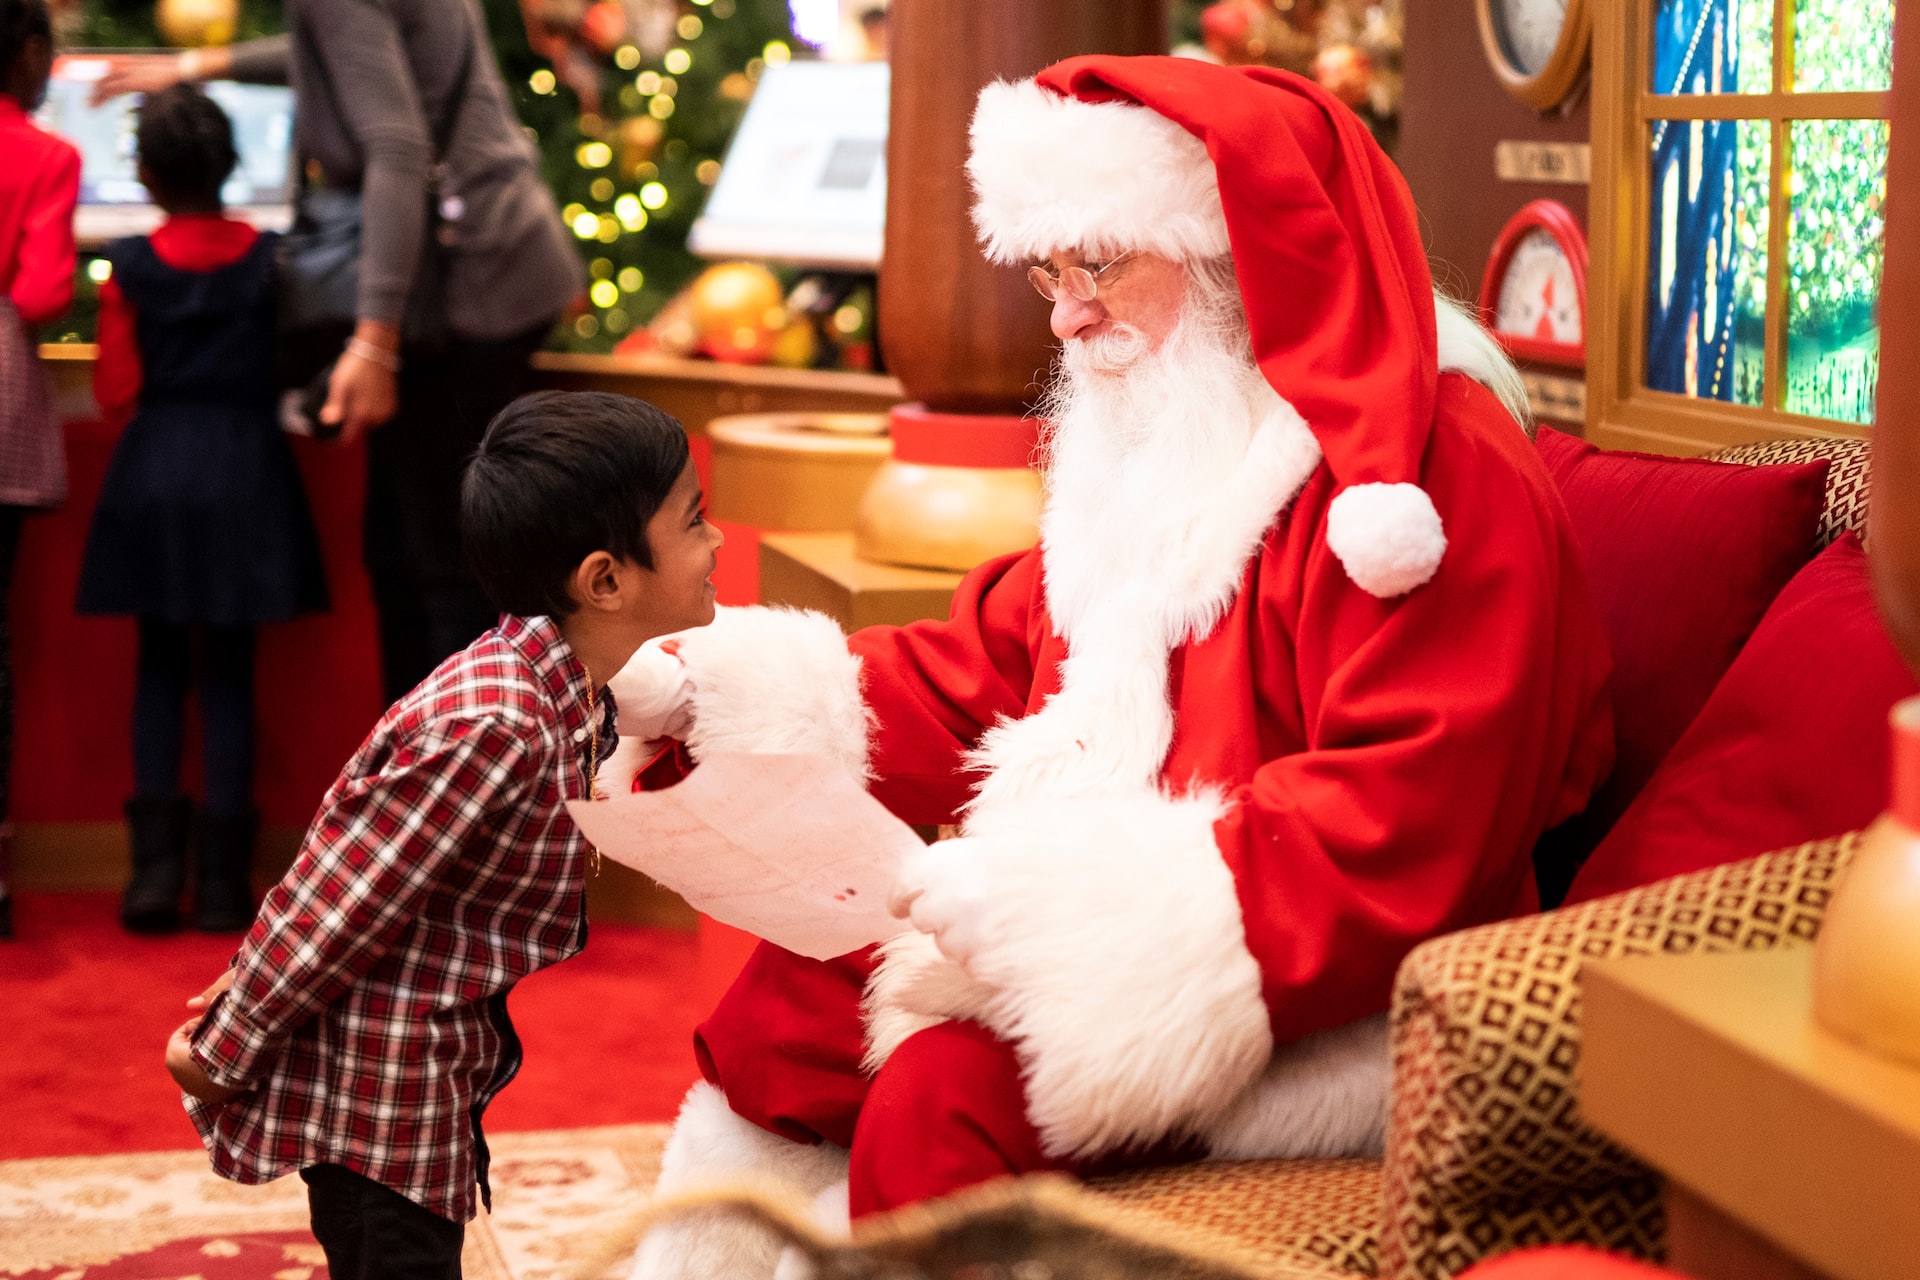 A boy standing in front of Santa Claus during a holiday festival.